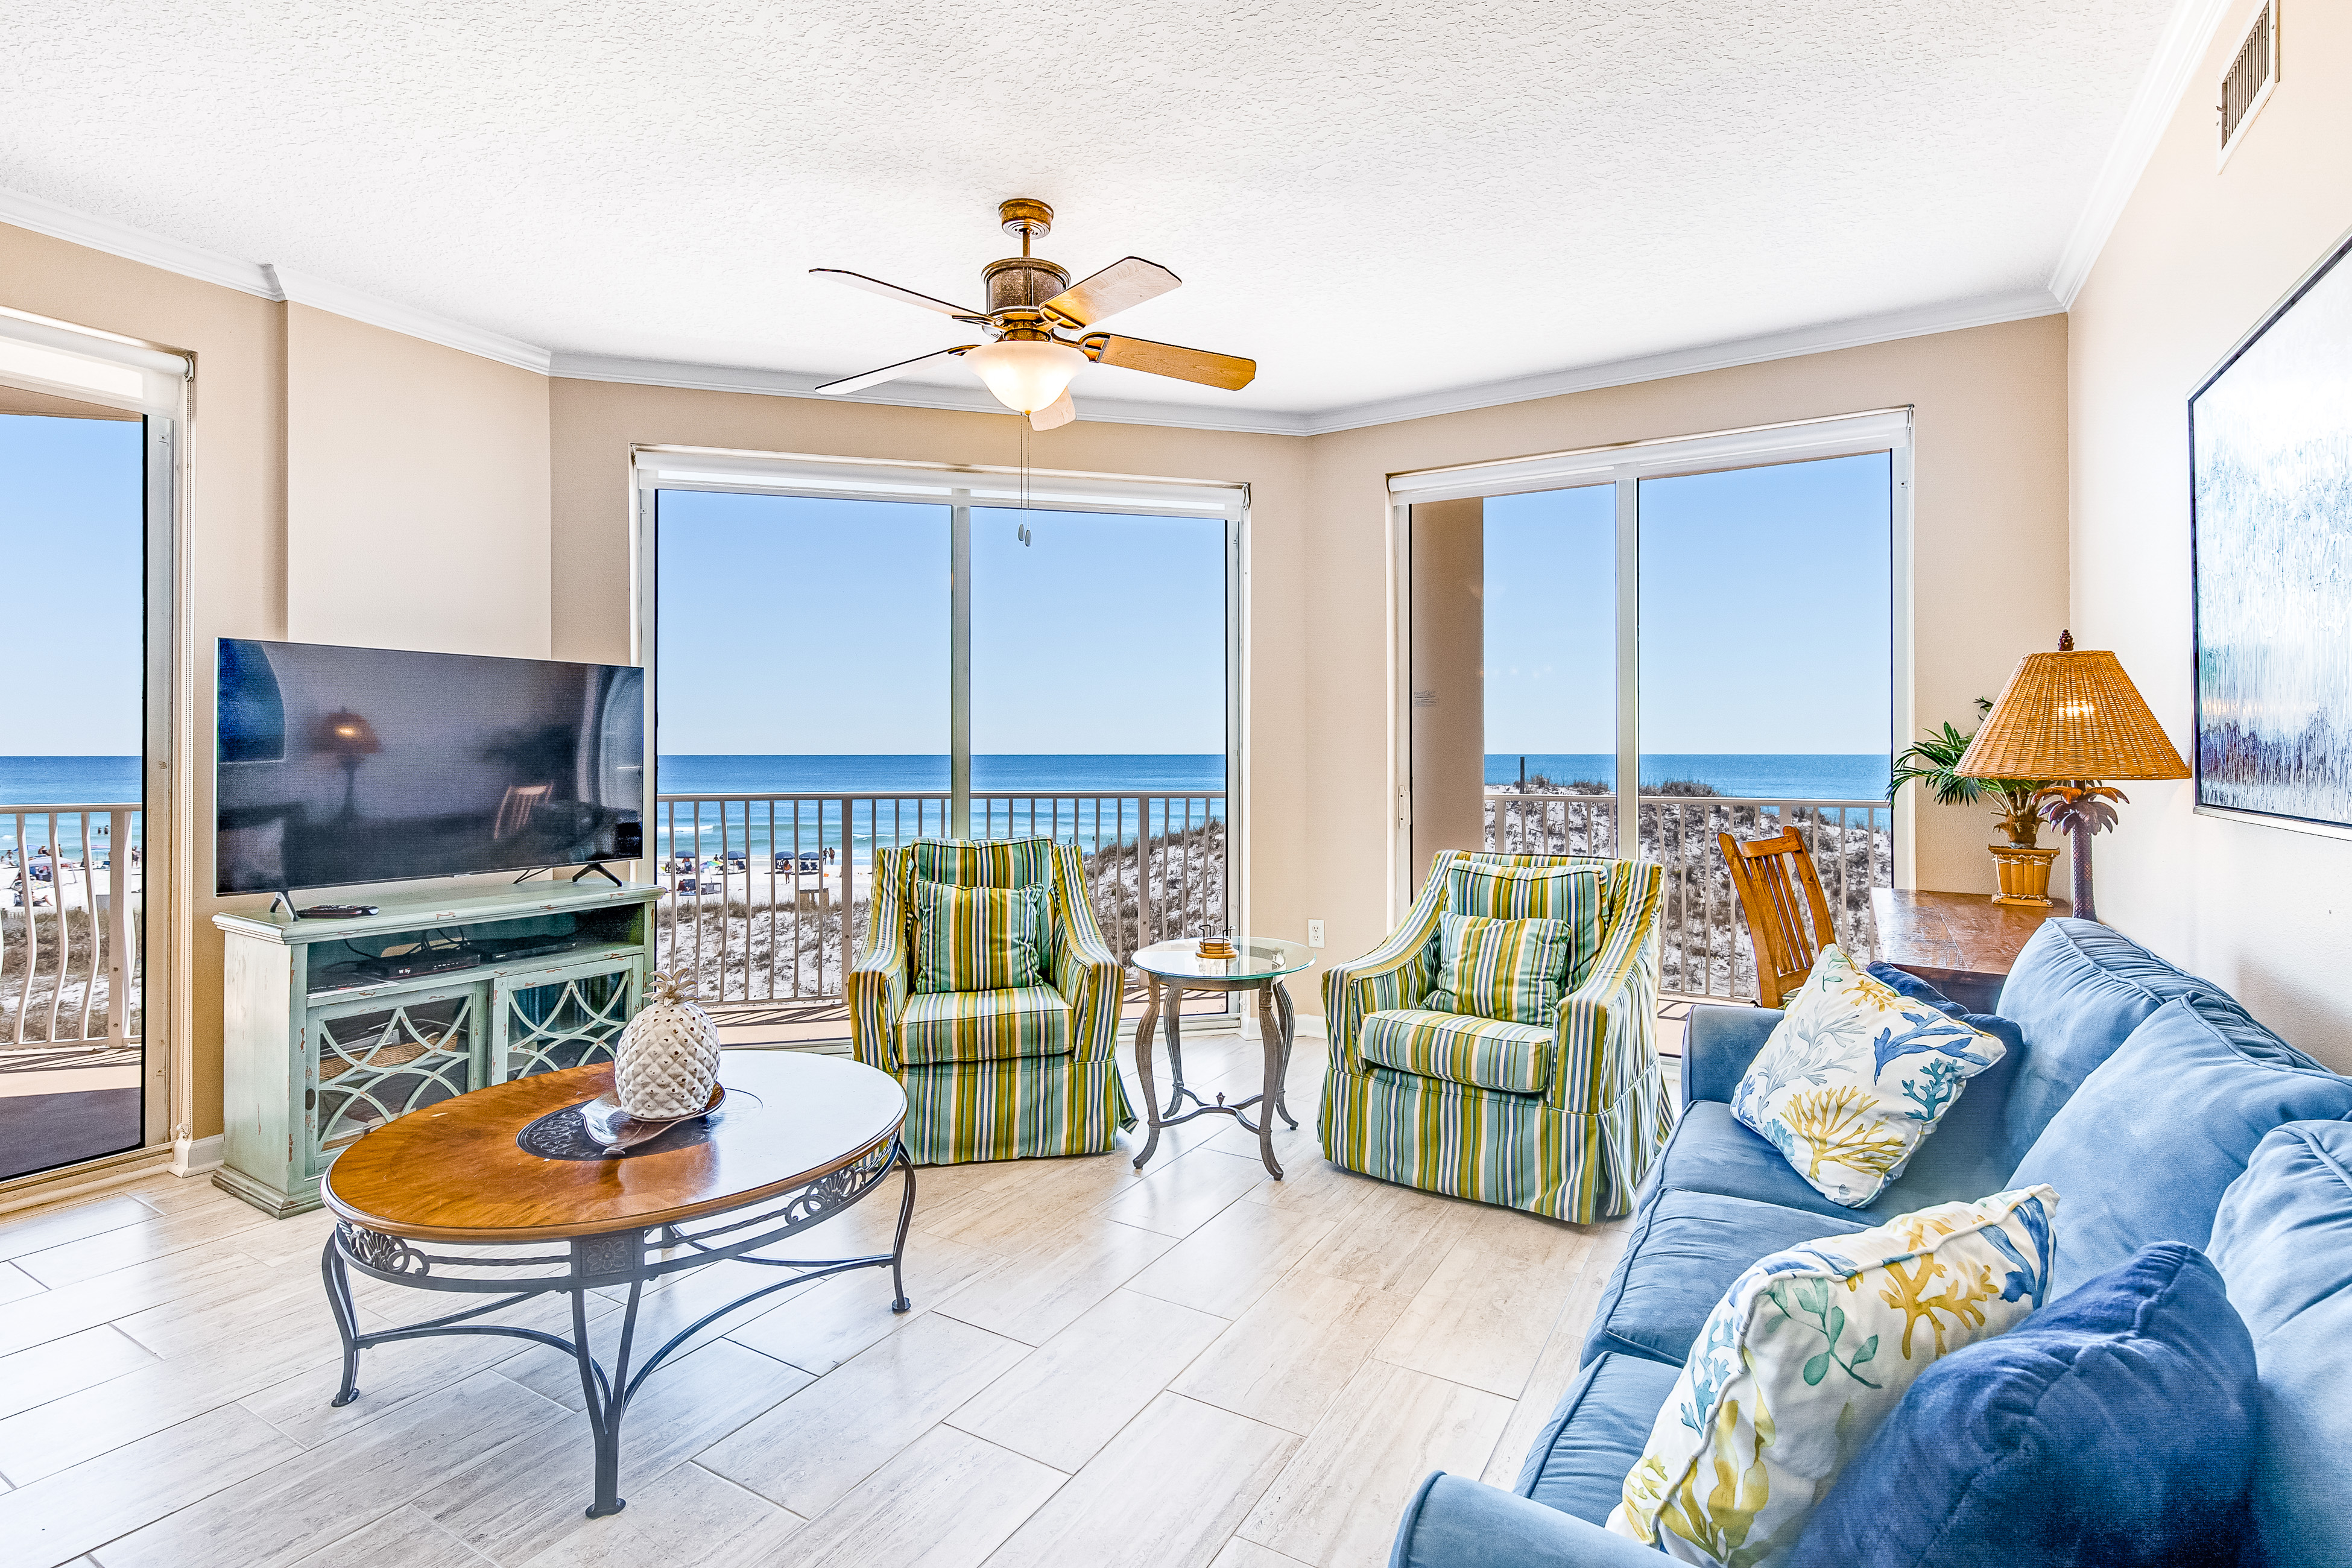 Dunes of Seagrove A210 Condo rental in Dunes of Seagrove in Highway 30-A Florida - #1